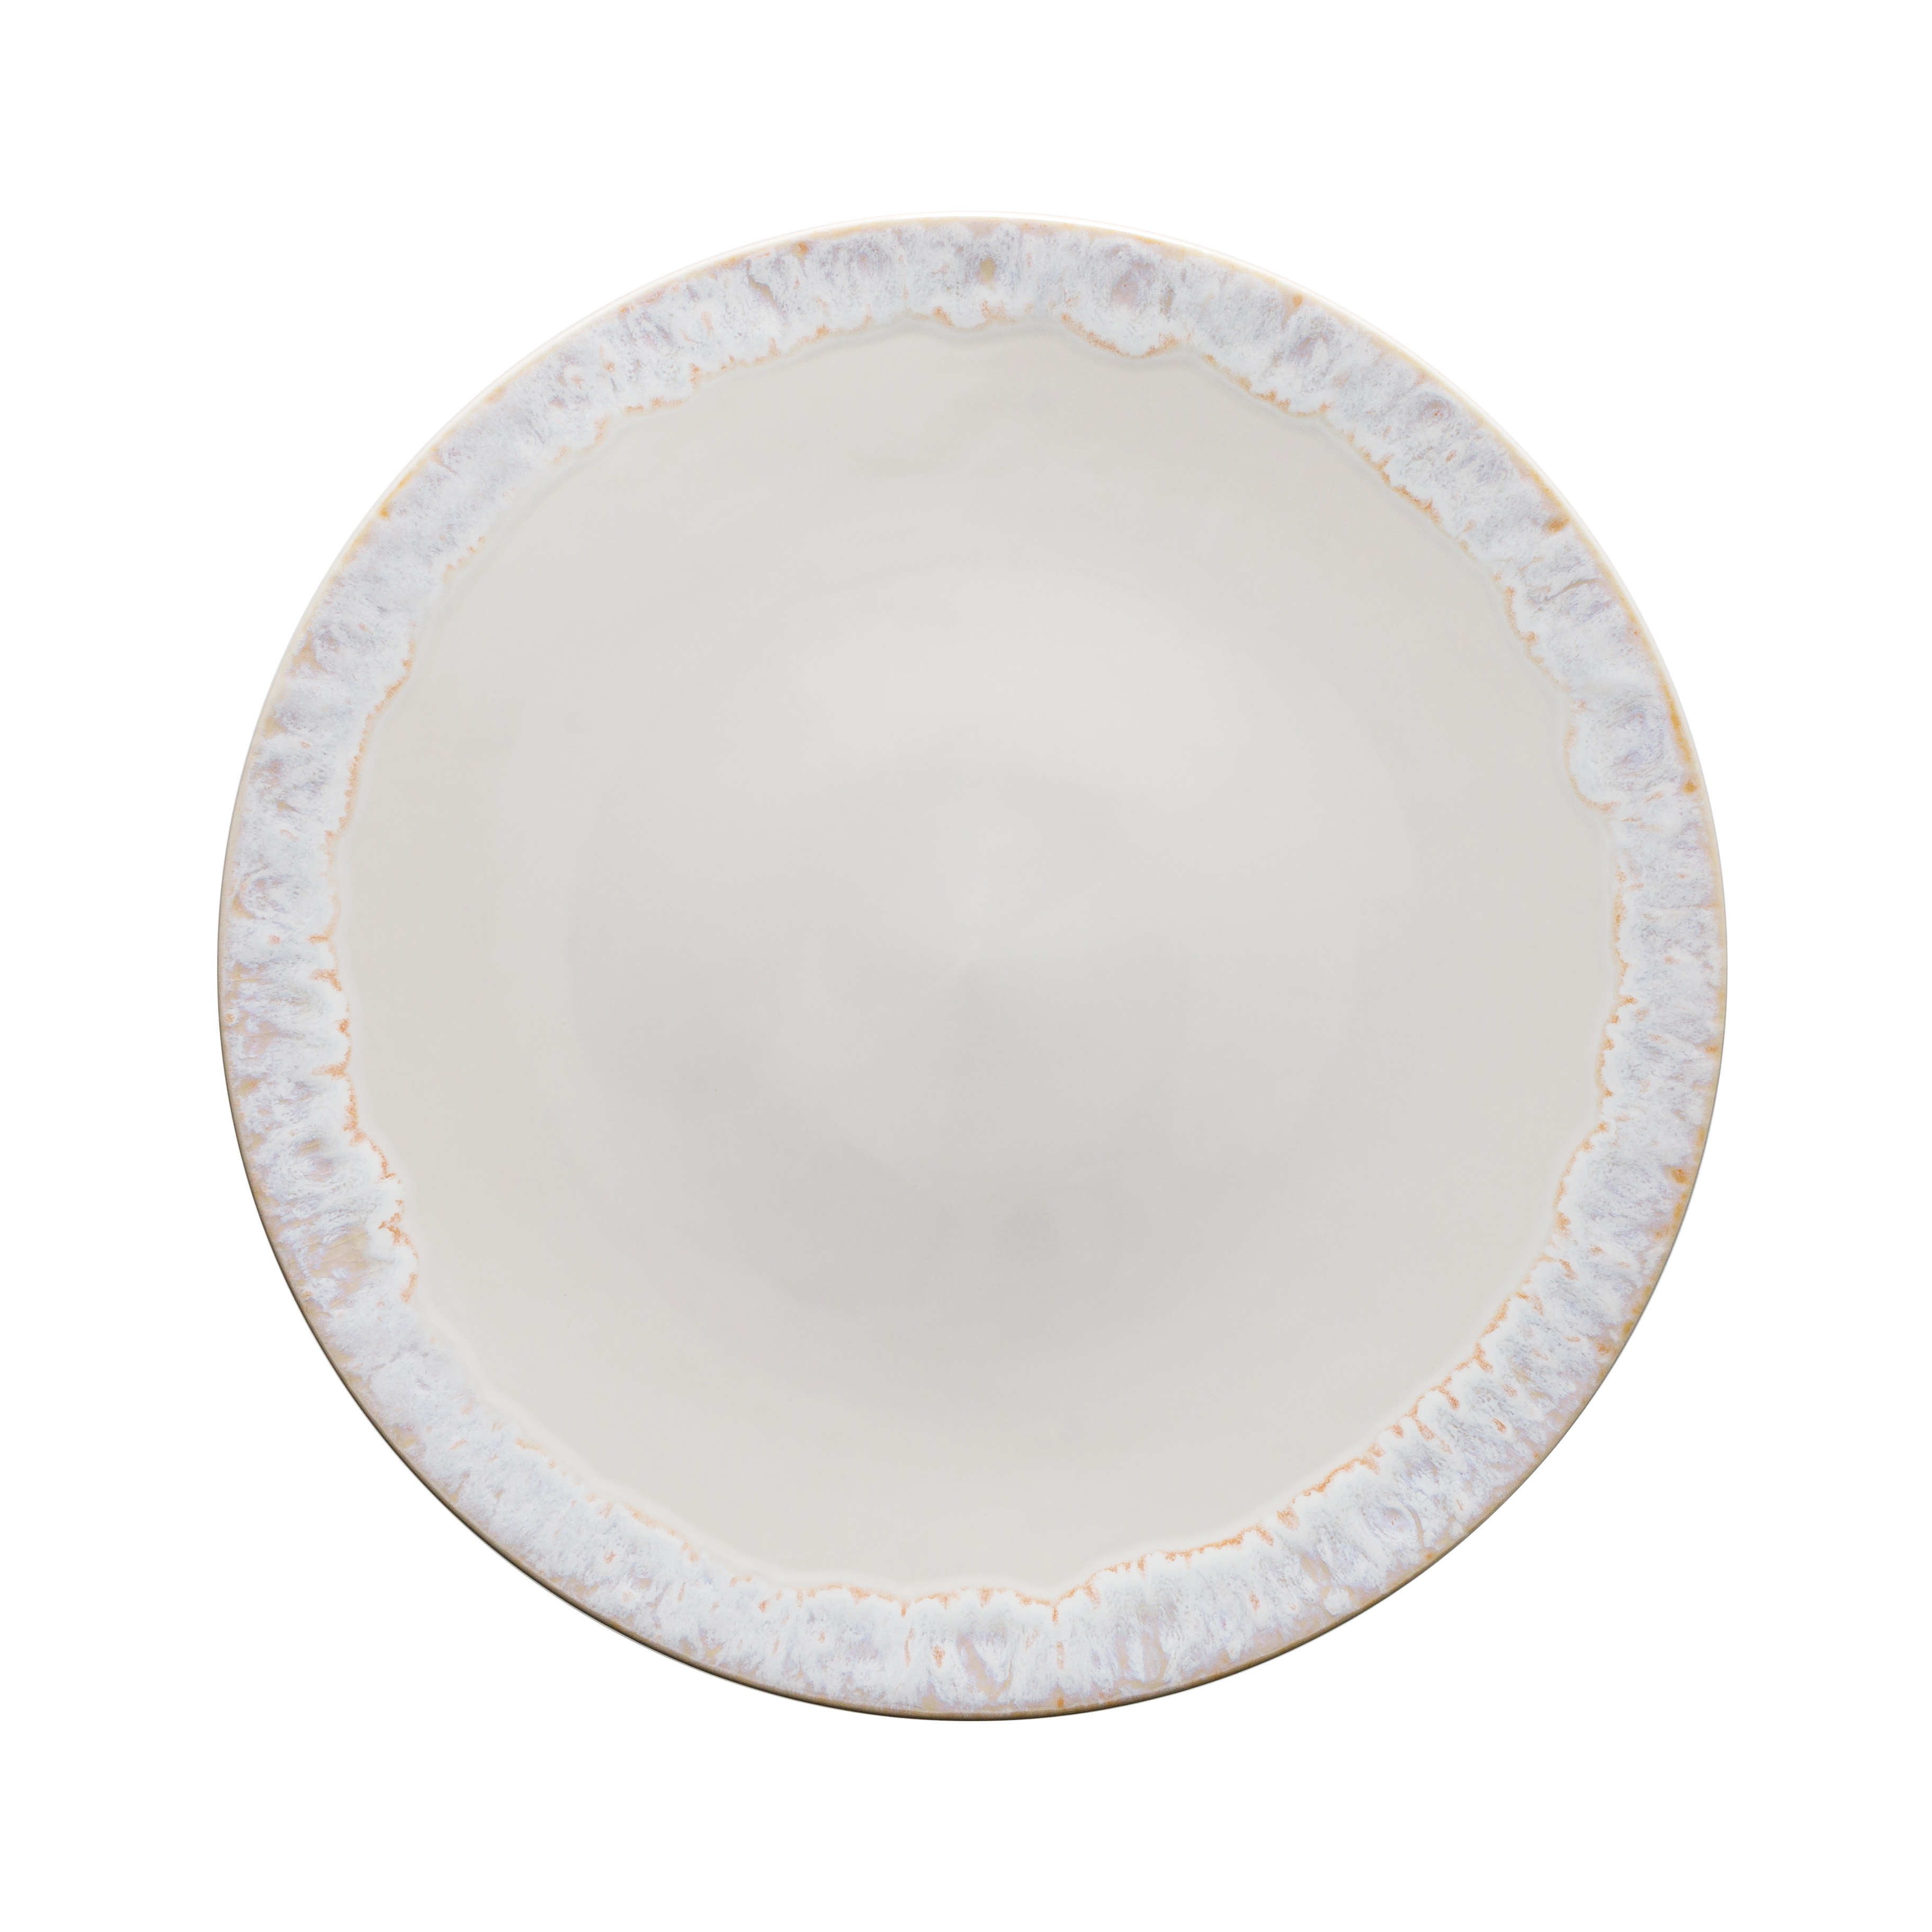 Taormina White Charger Plate 34.6cm Gift